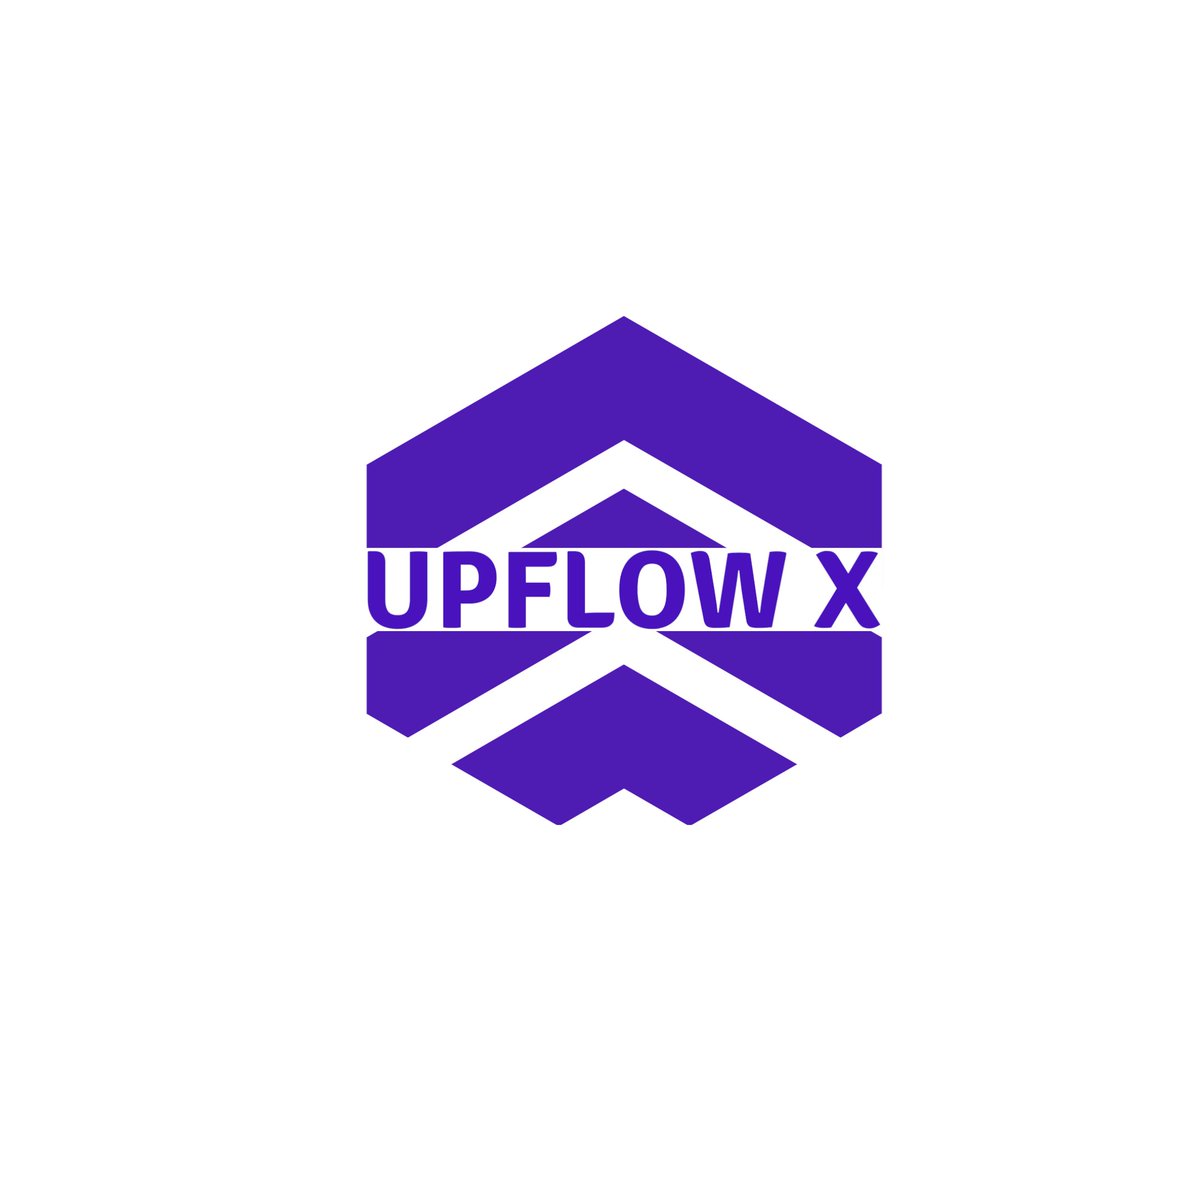 UPFLOW X - A marketing software for Health and Wellness Coaches.

#healthandwellnesscoaches #healthcoaches #wellnesscoaches #upflowx #marketingsoftware #marketingsoftwareforcoaches #healthandwellnesscoaching #upflowxmarketingsoftware